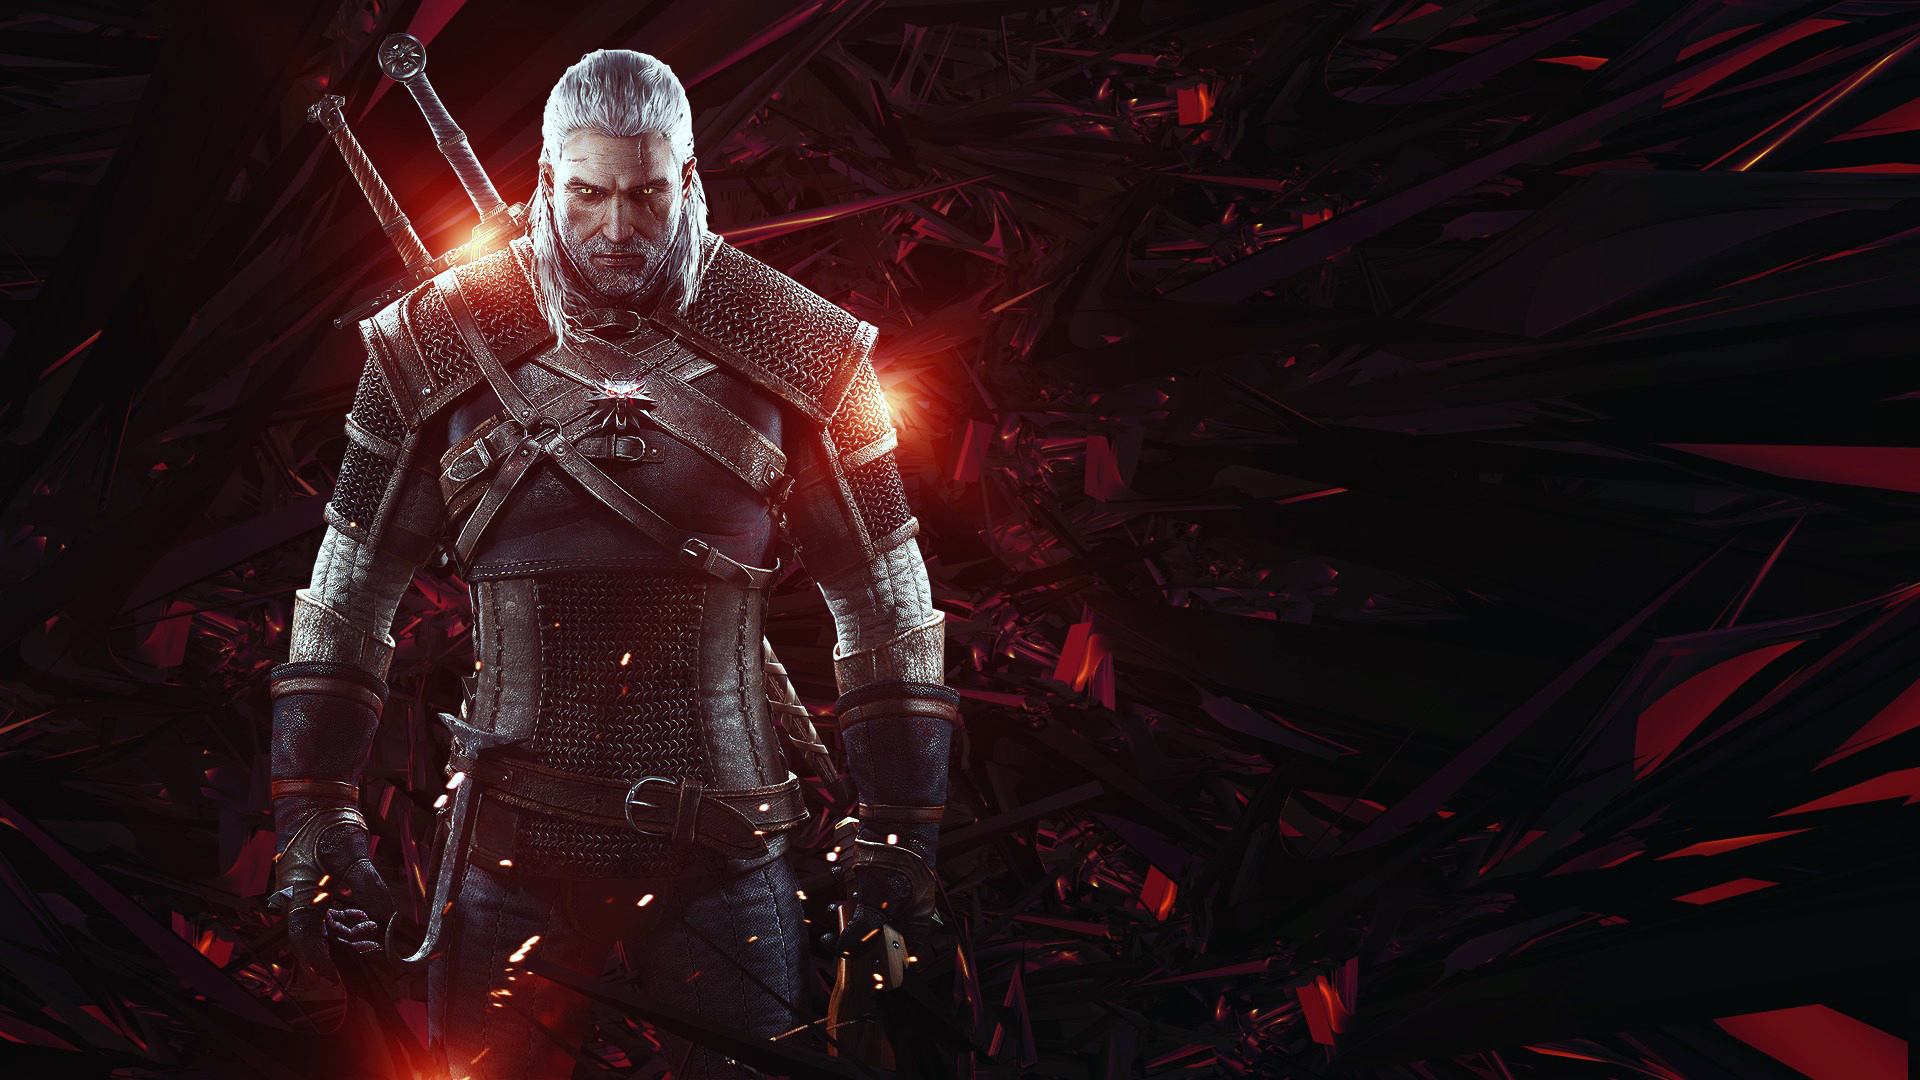 174 0 1434064566 - The Witcher 3: Wild Hunt - HD Wallpaper 